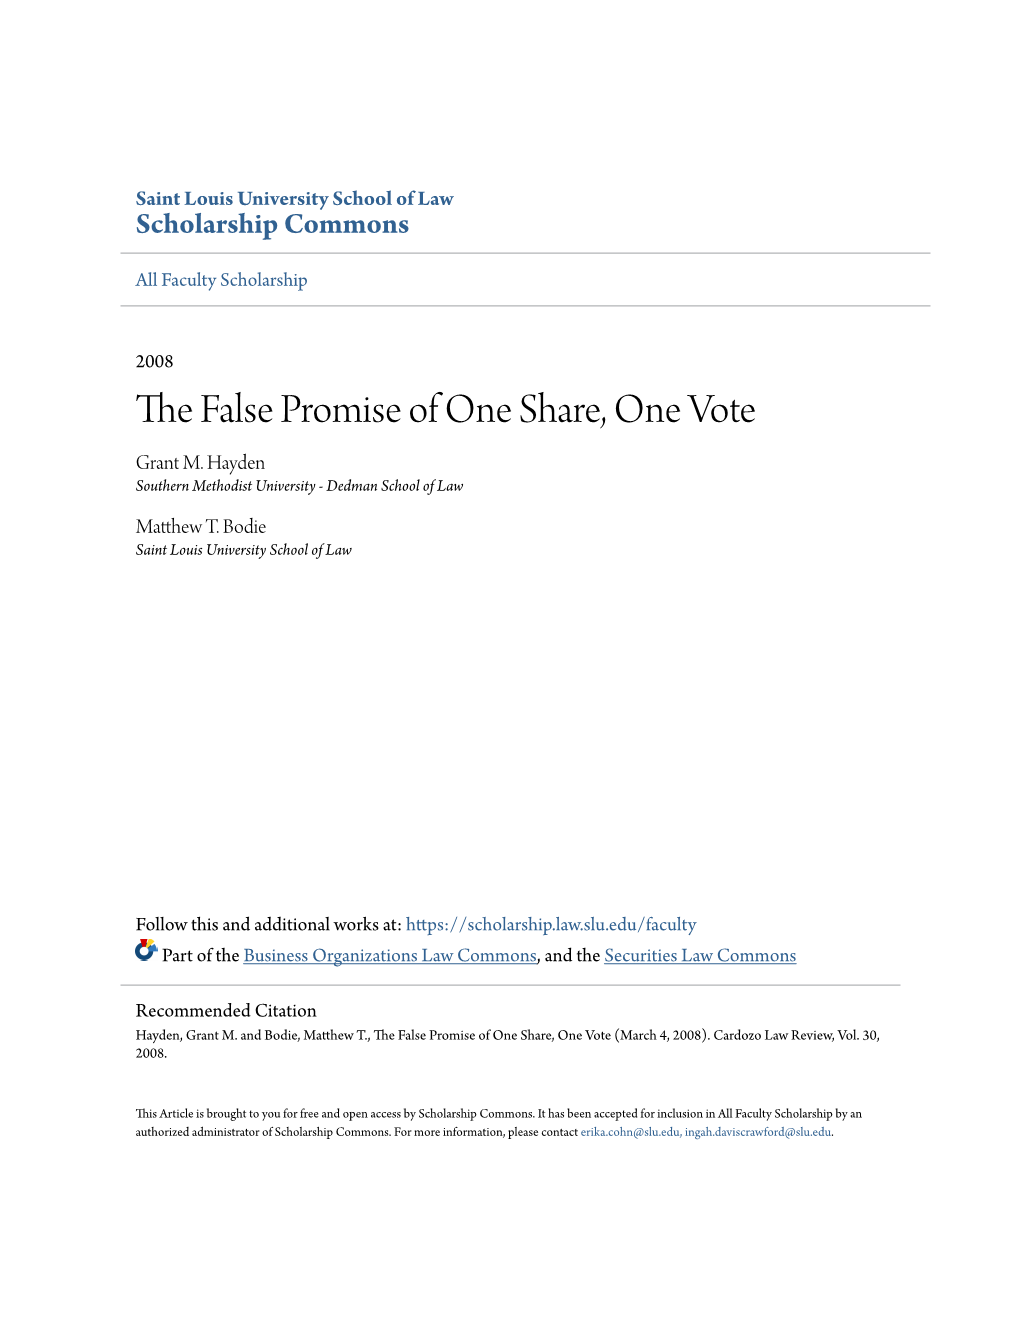 The False Promise of One Share, One Vote